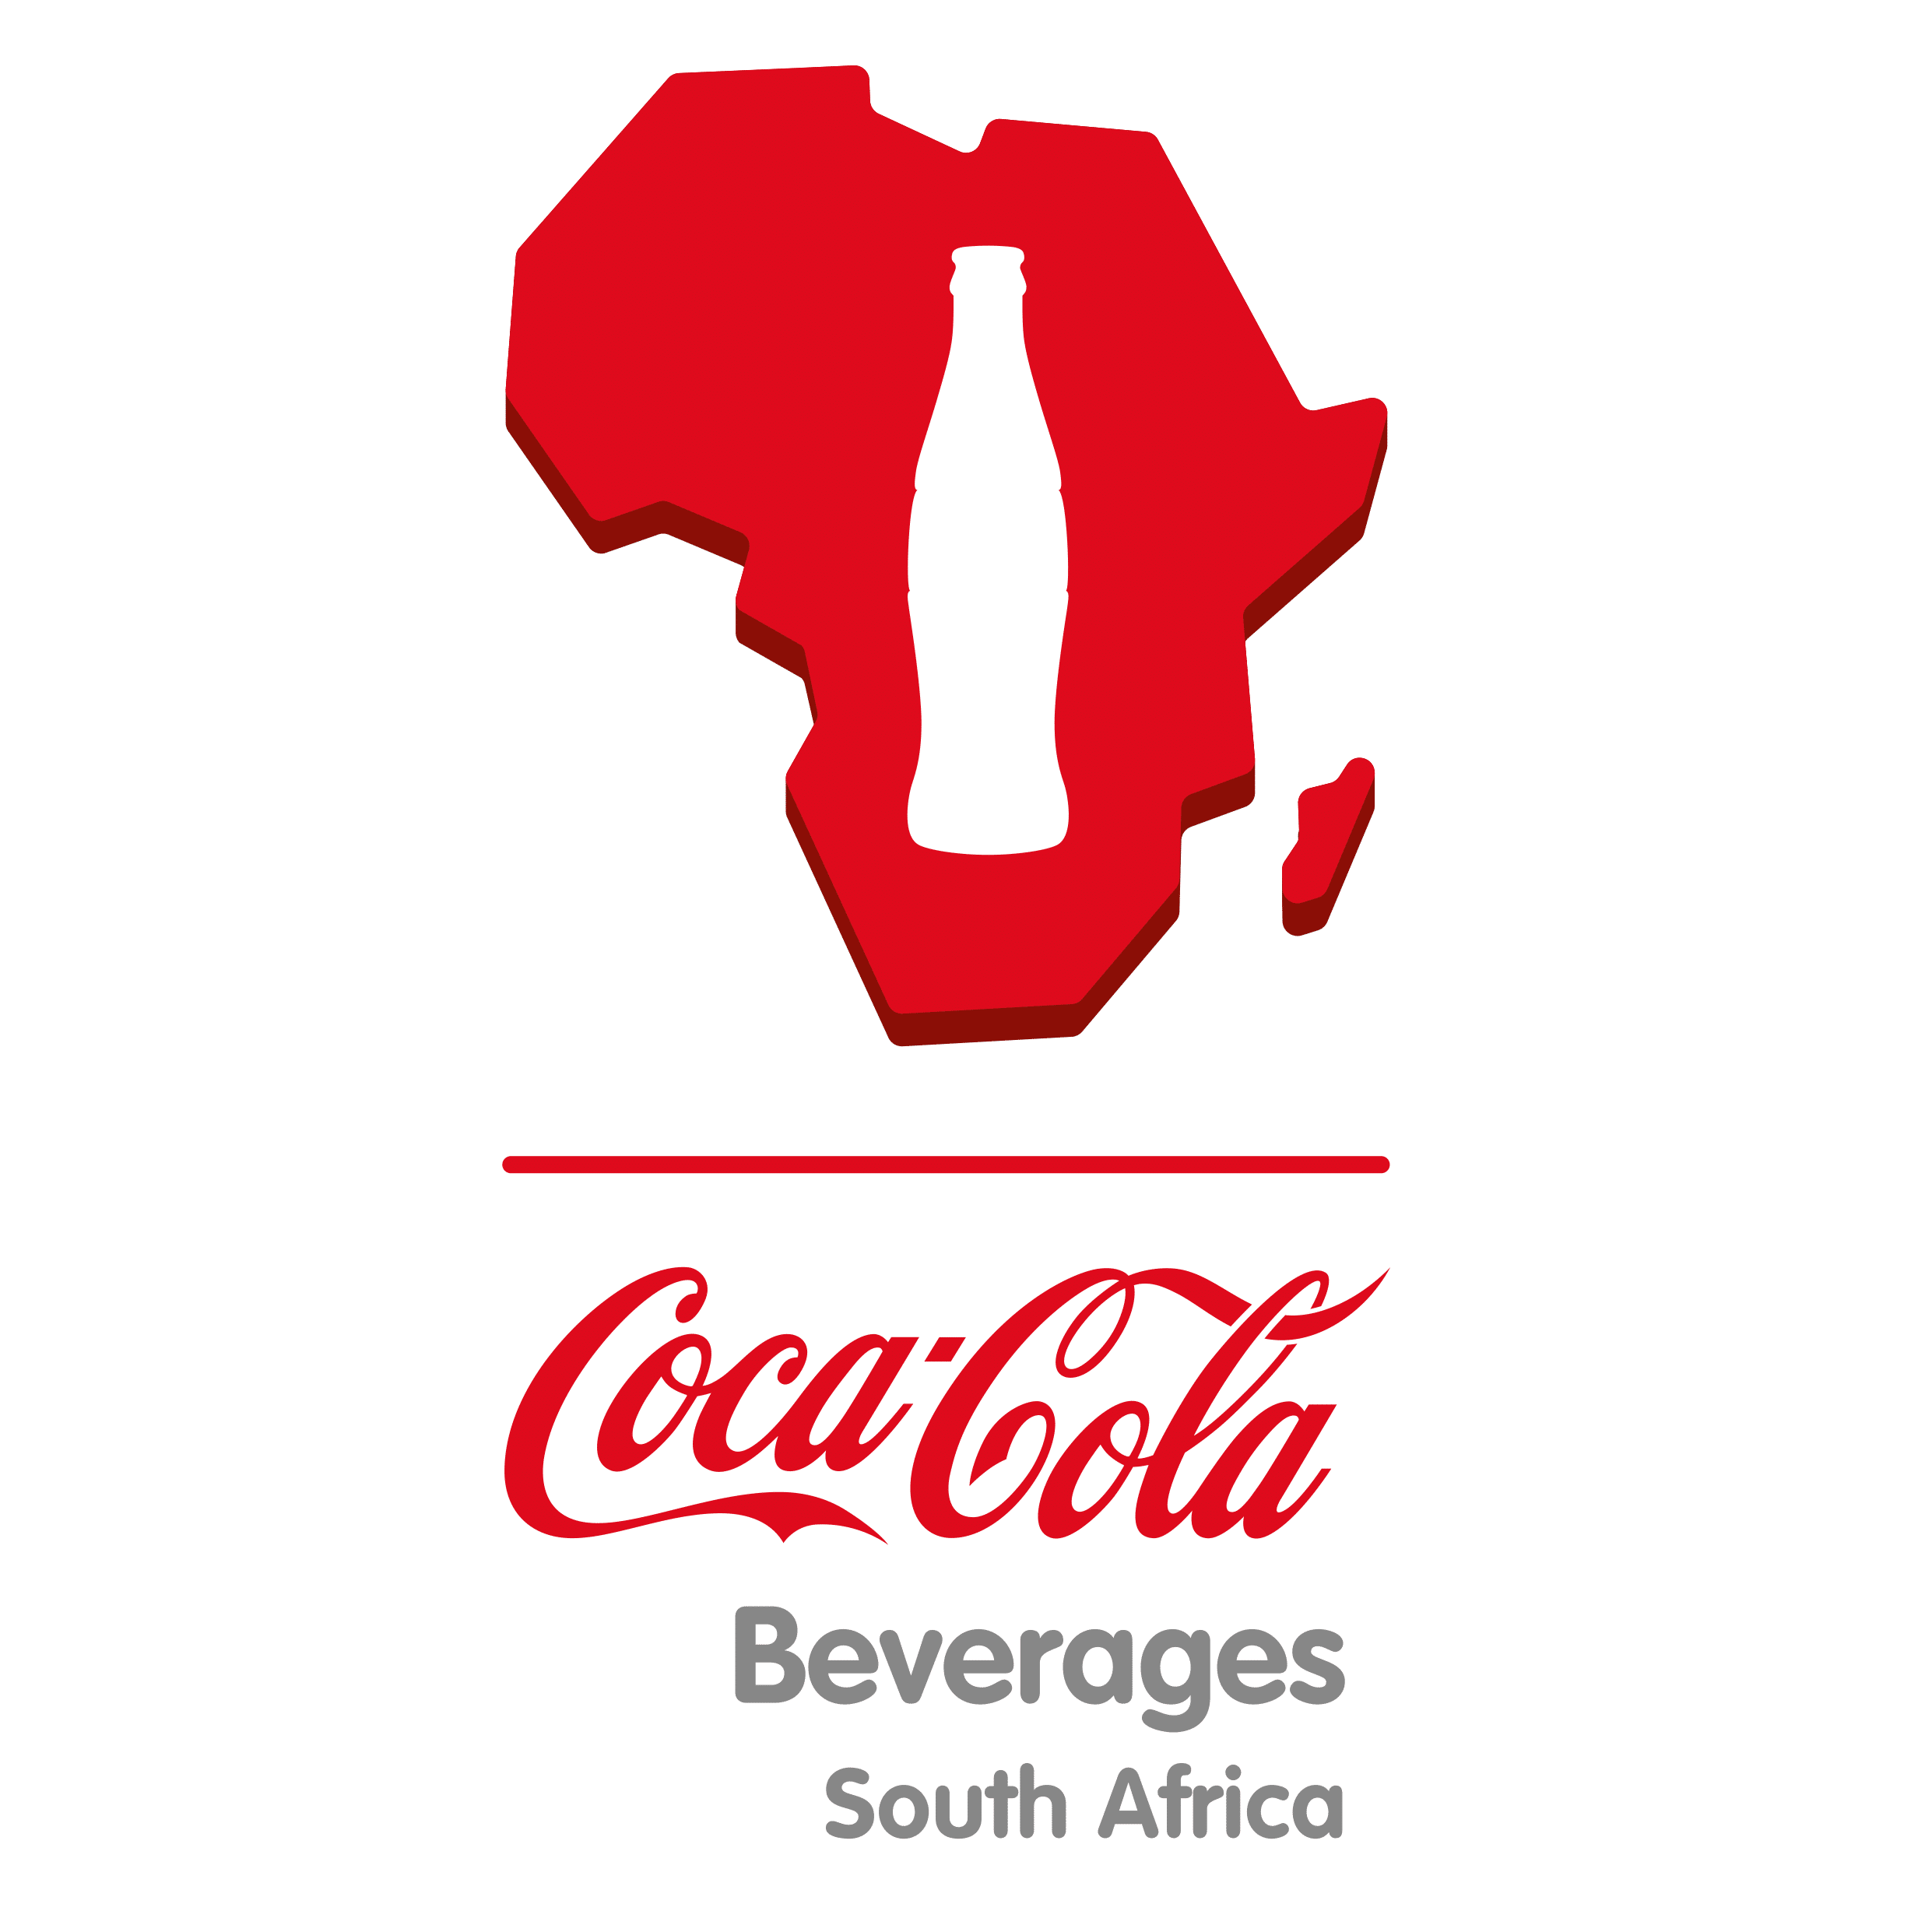 Coca Cola Beverages South Africa Management Trainee 2021 for Graduate South Africans